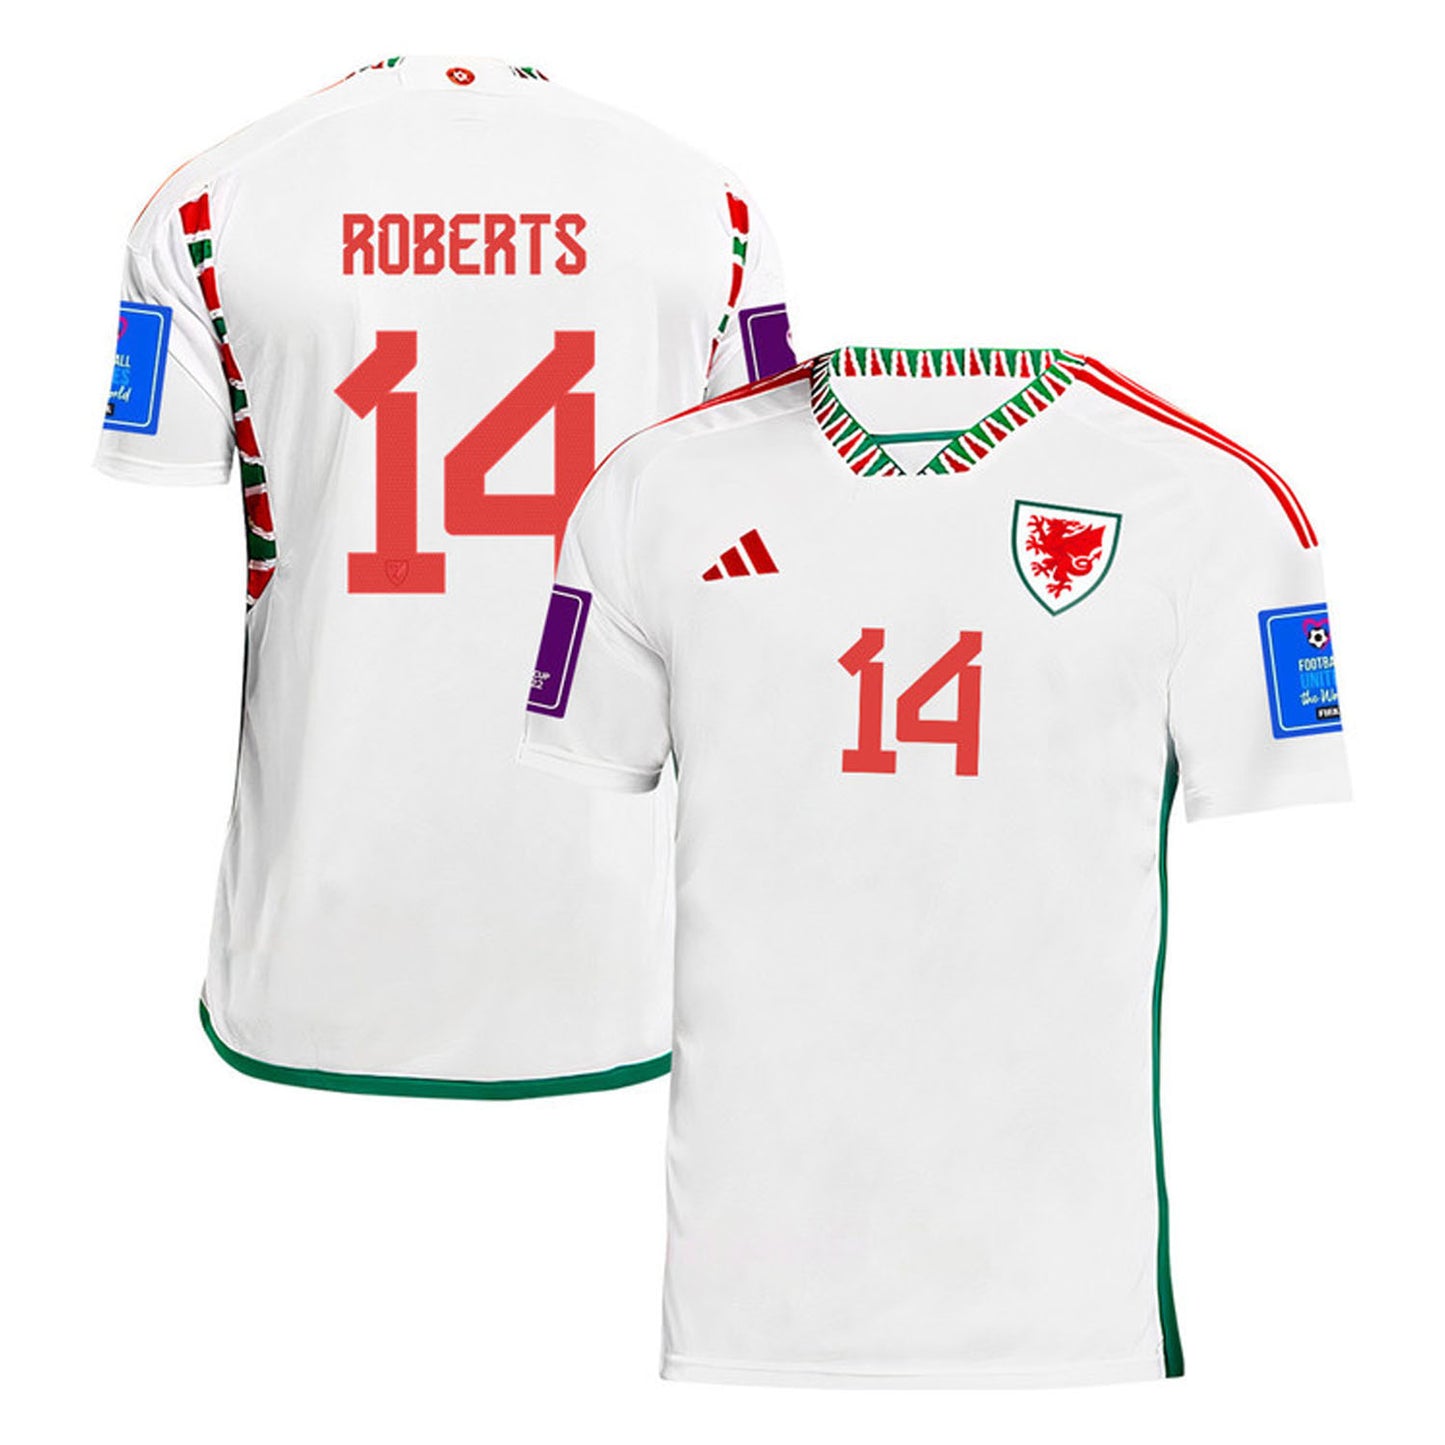 Connor Roberts Wales 14 Fifa World Cup Jersey